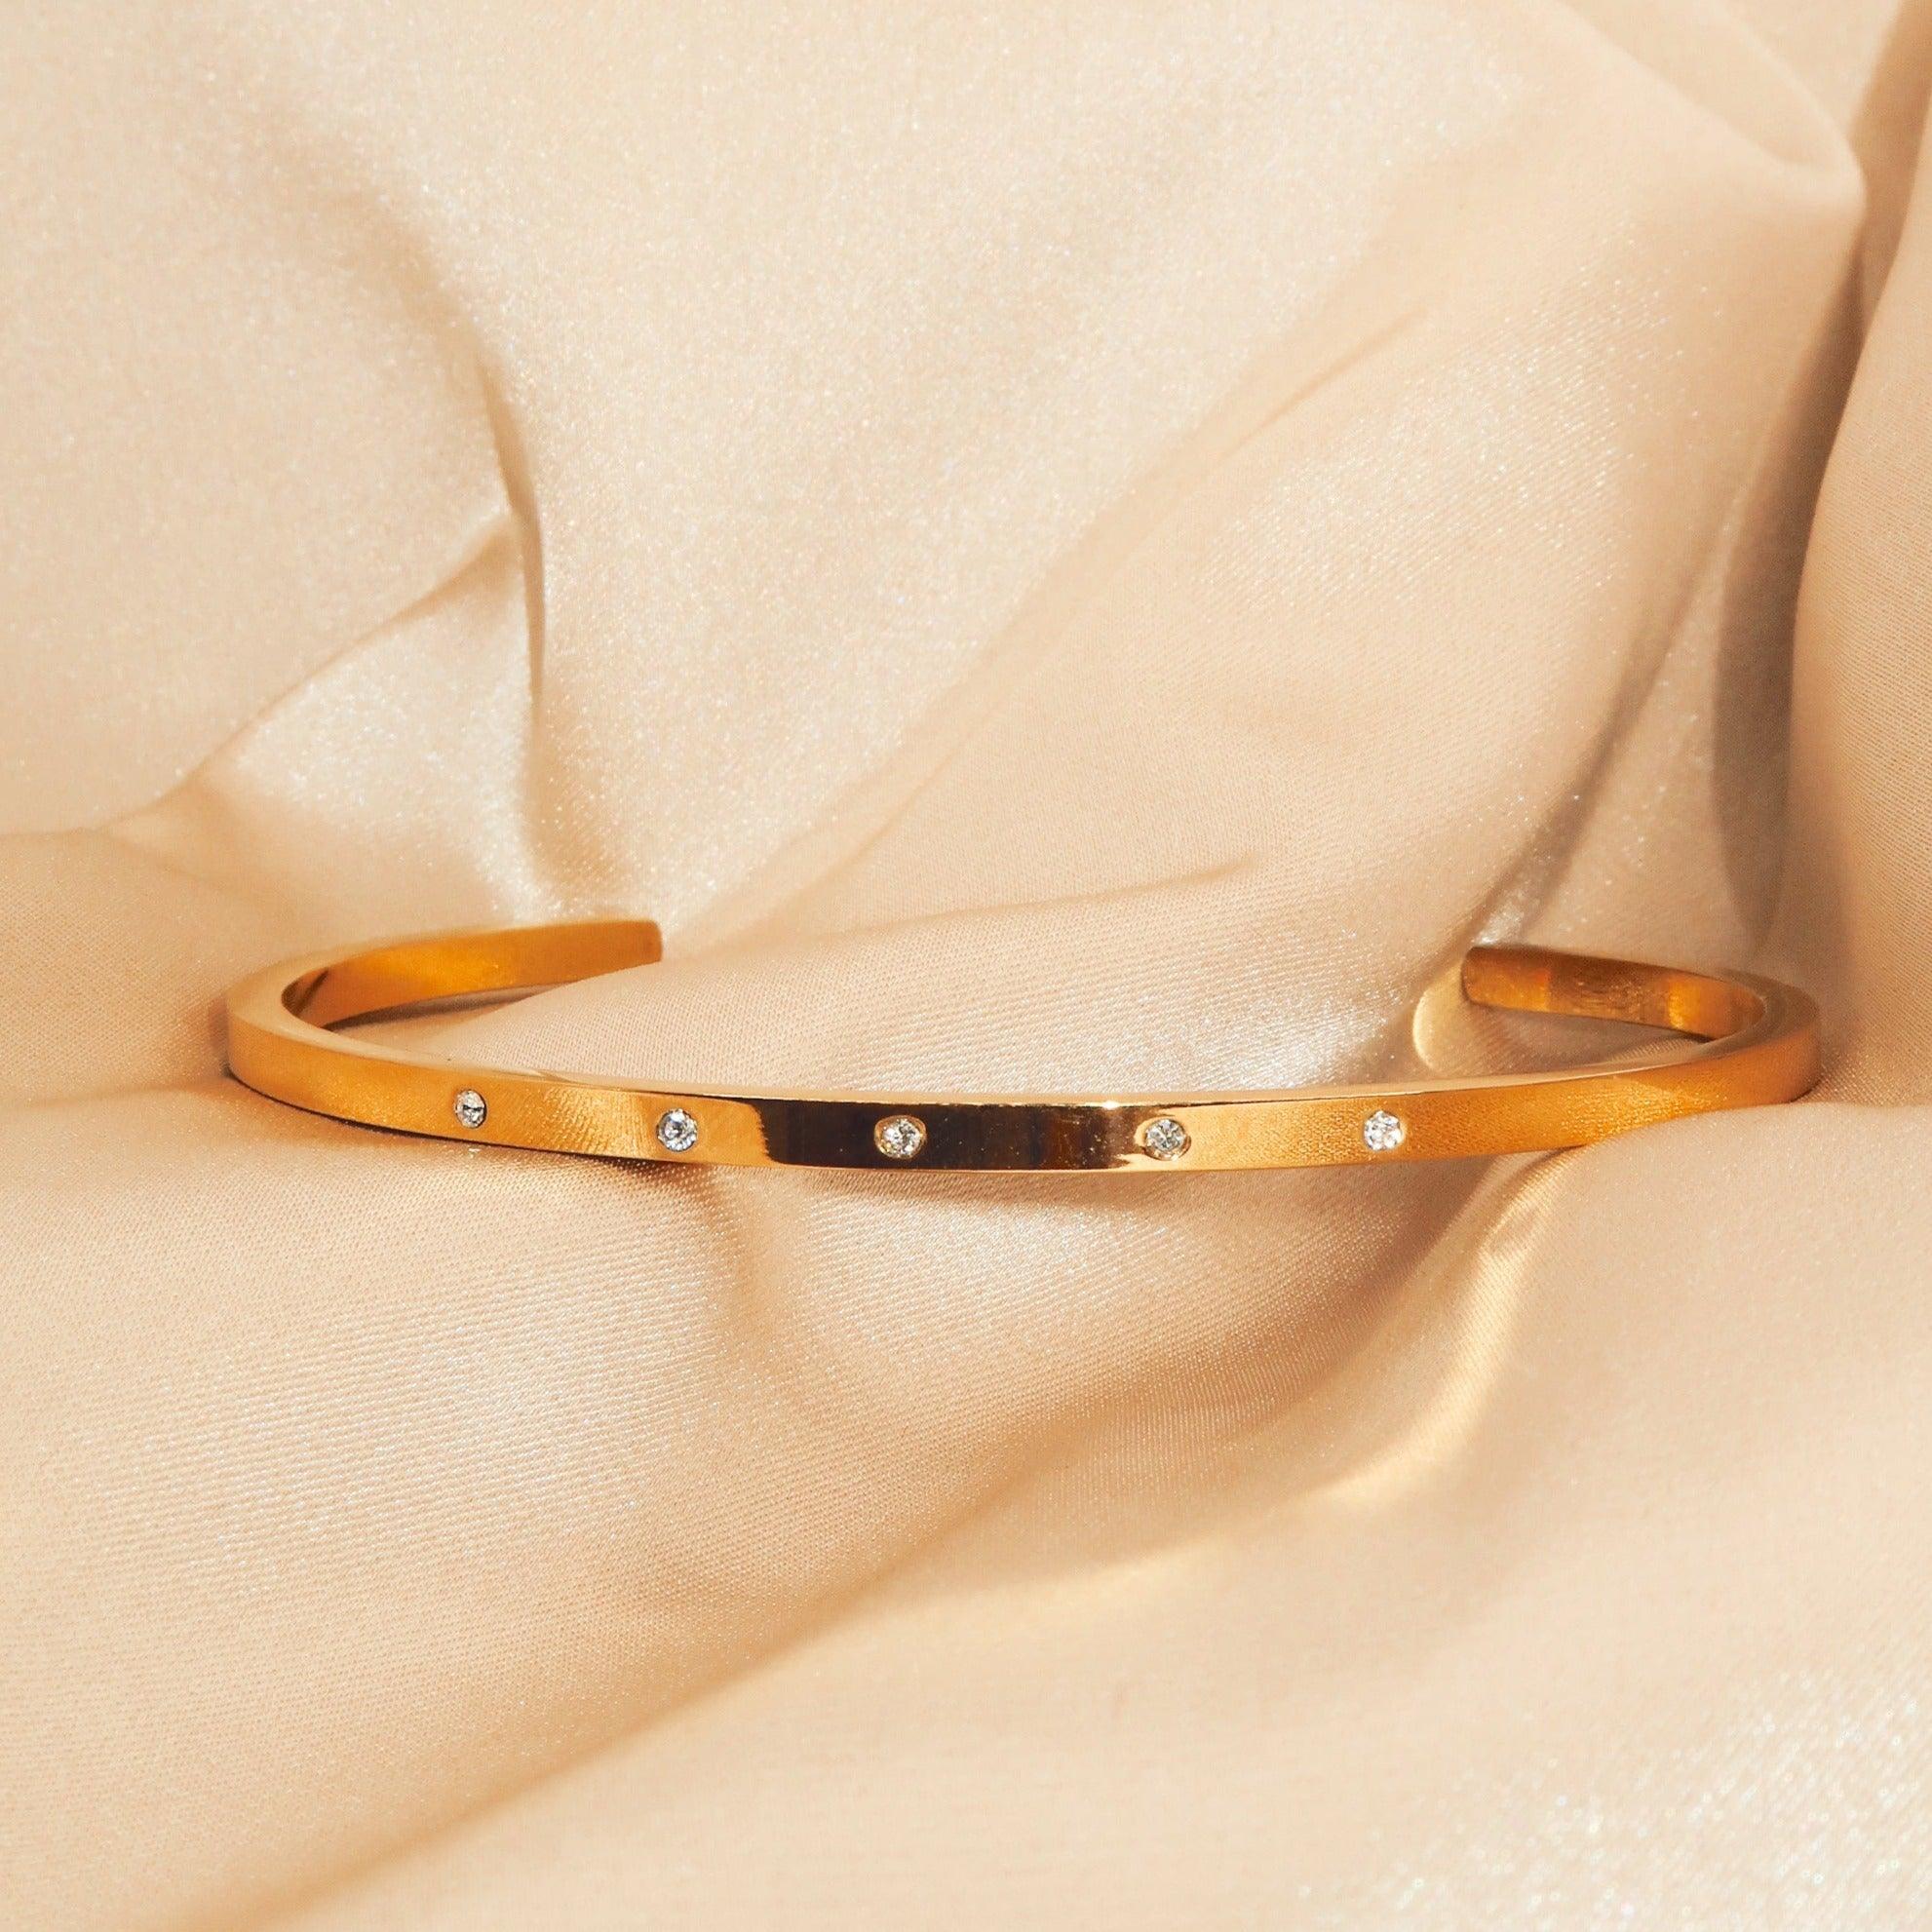 JULIET - 18K PVD Gold Plated Adjustable Stackable Cuff Bracelet with CZ Stones - Mixed Metals